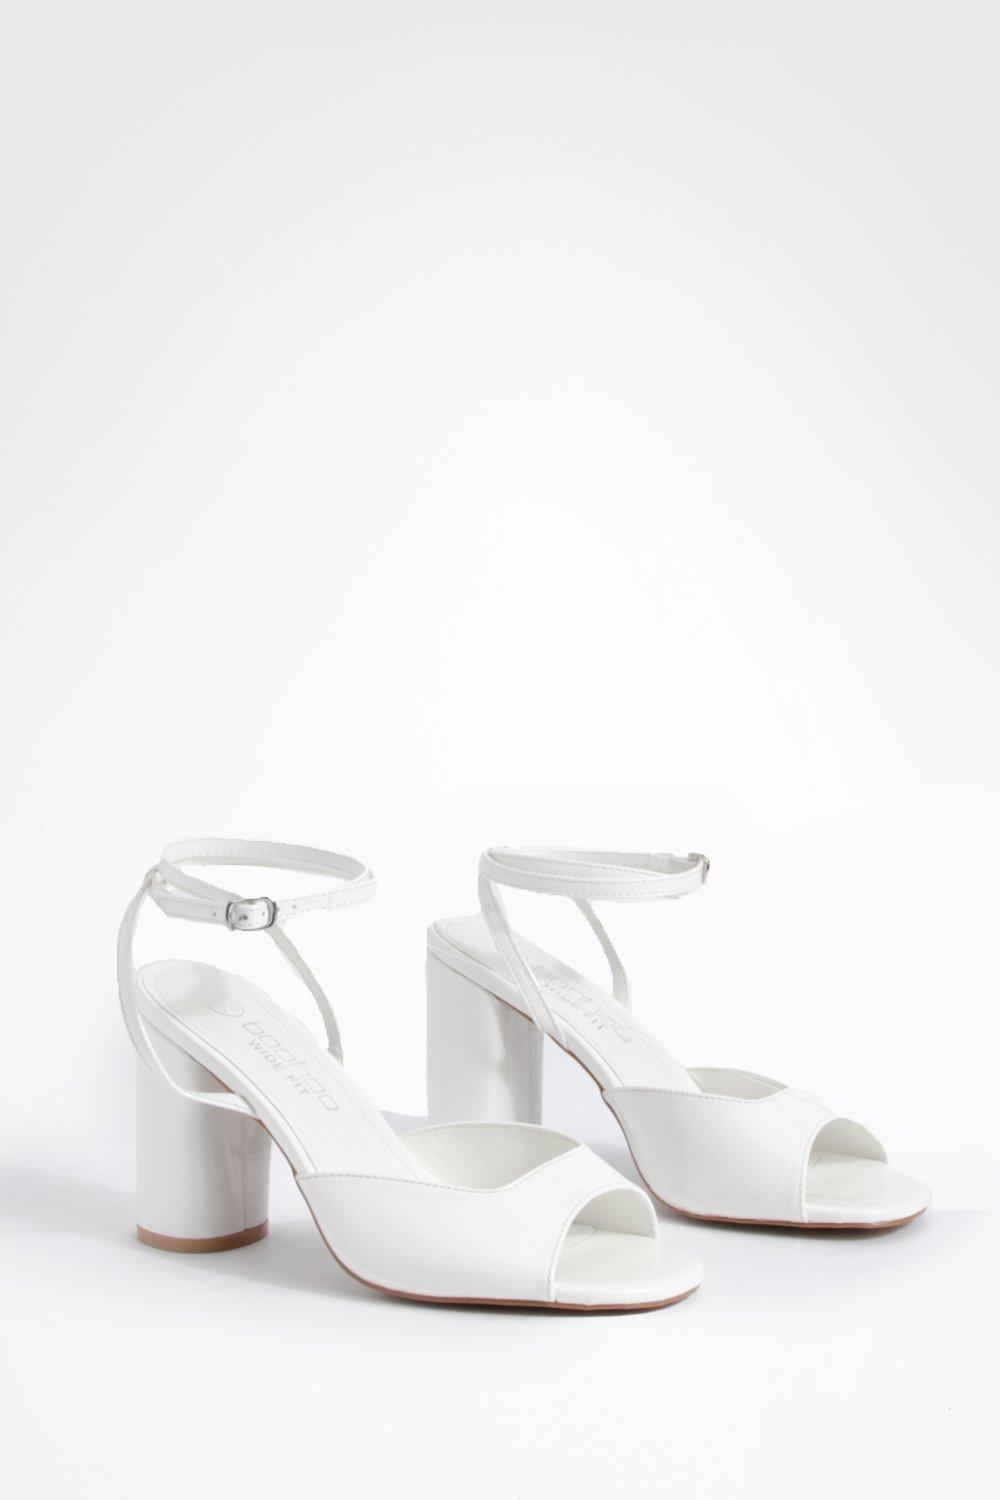 wide fit croc rounded heel strappy barely there heels - blanc - 38, blanc